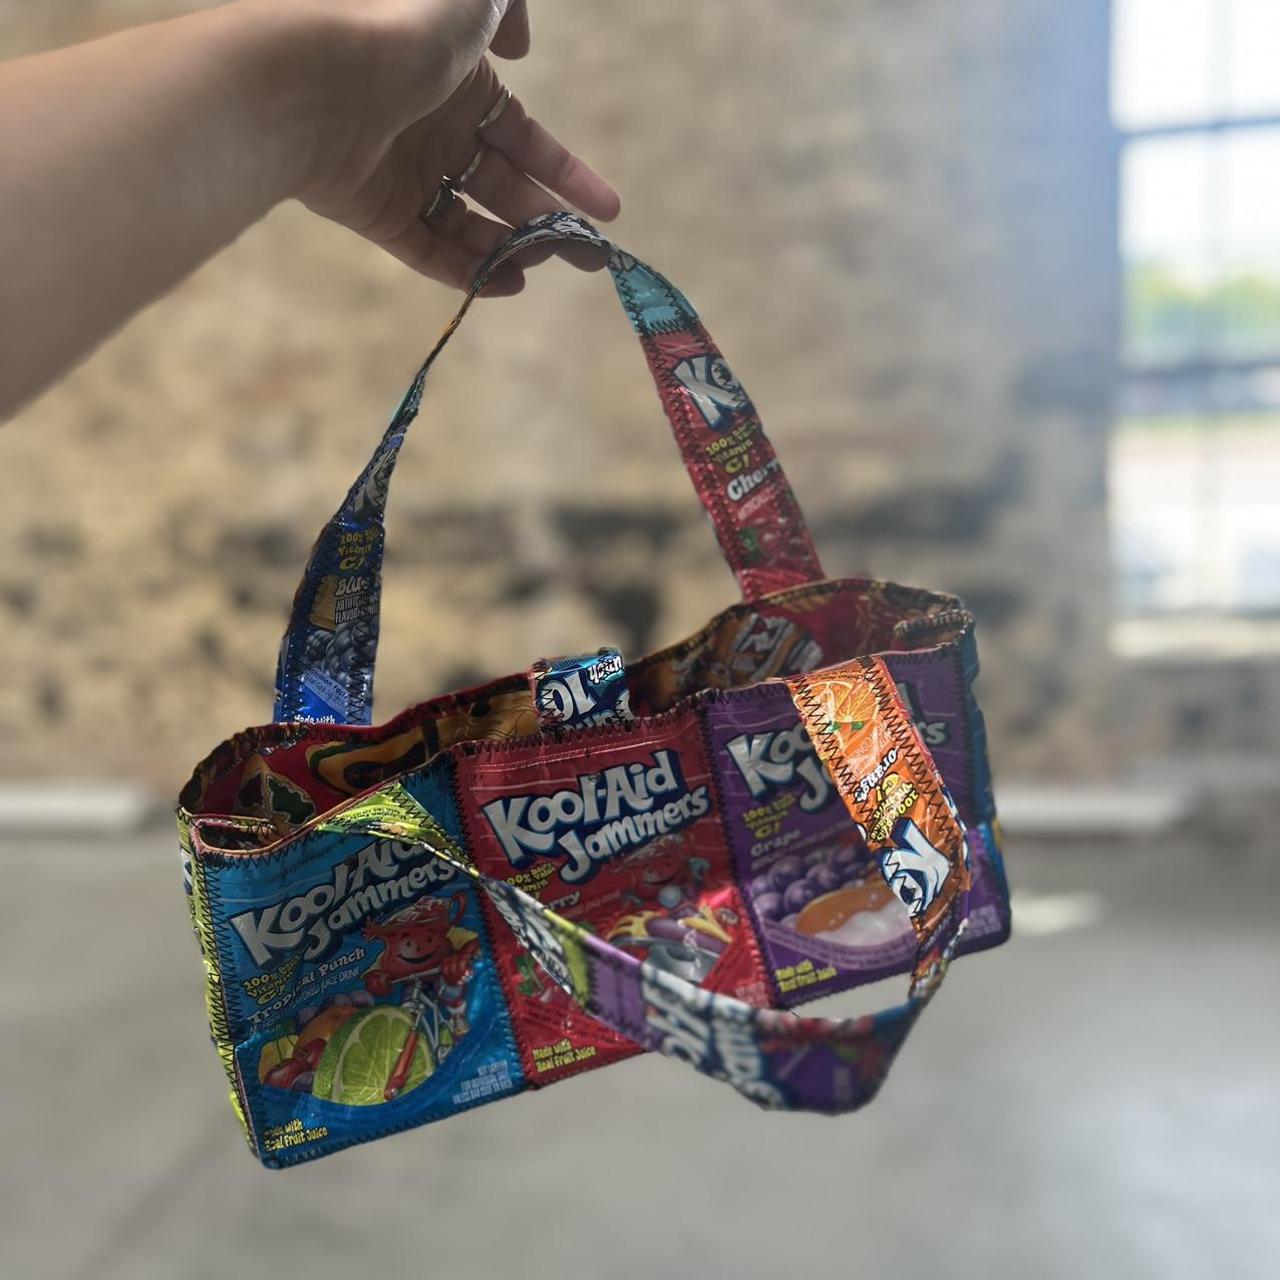 Kool-Aid Jammers Purse Bag Tote for Sale in Pasadena, TX - OfferUp